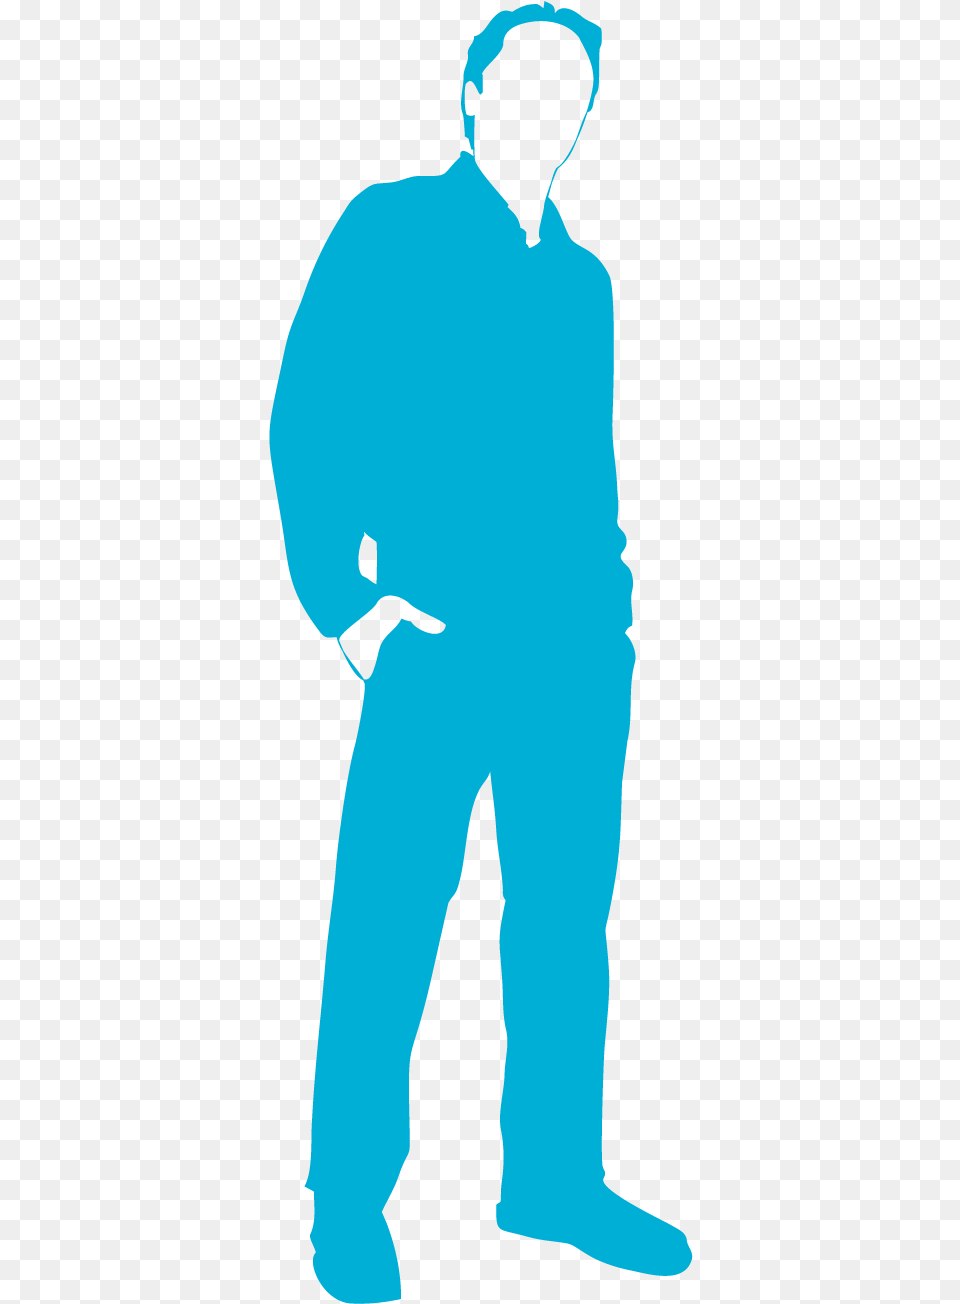 Business, Clothing, Pants, Adult, Male Png Image